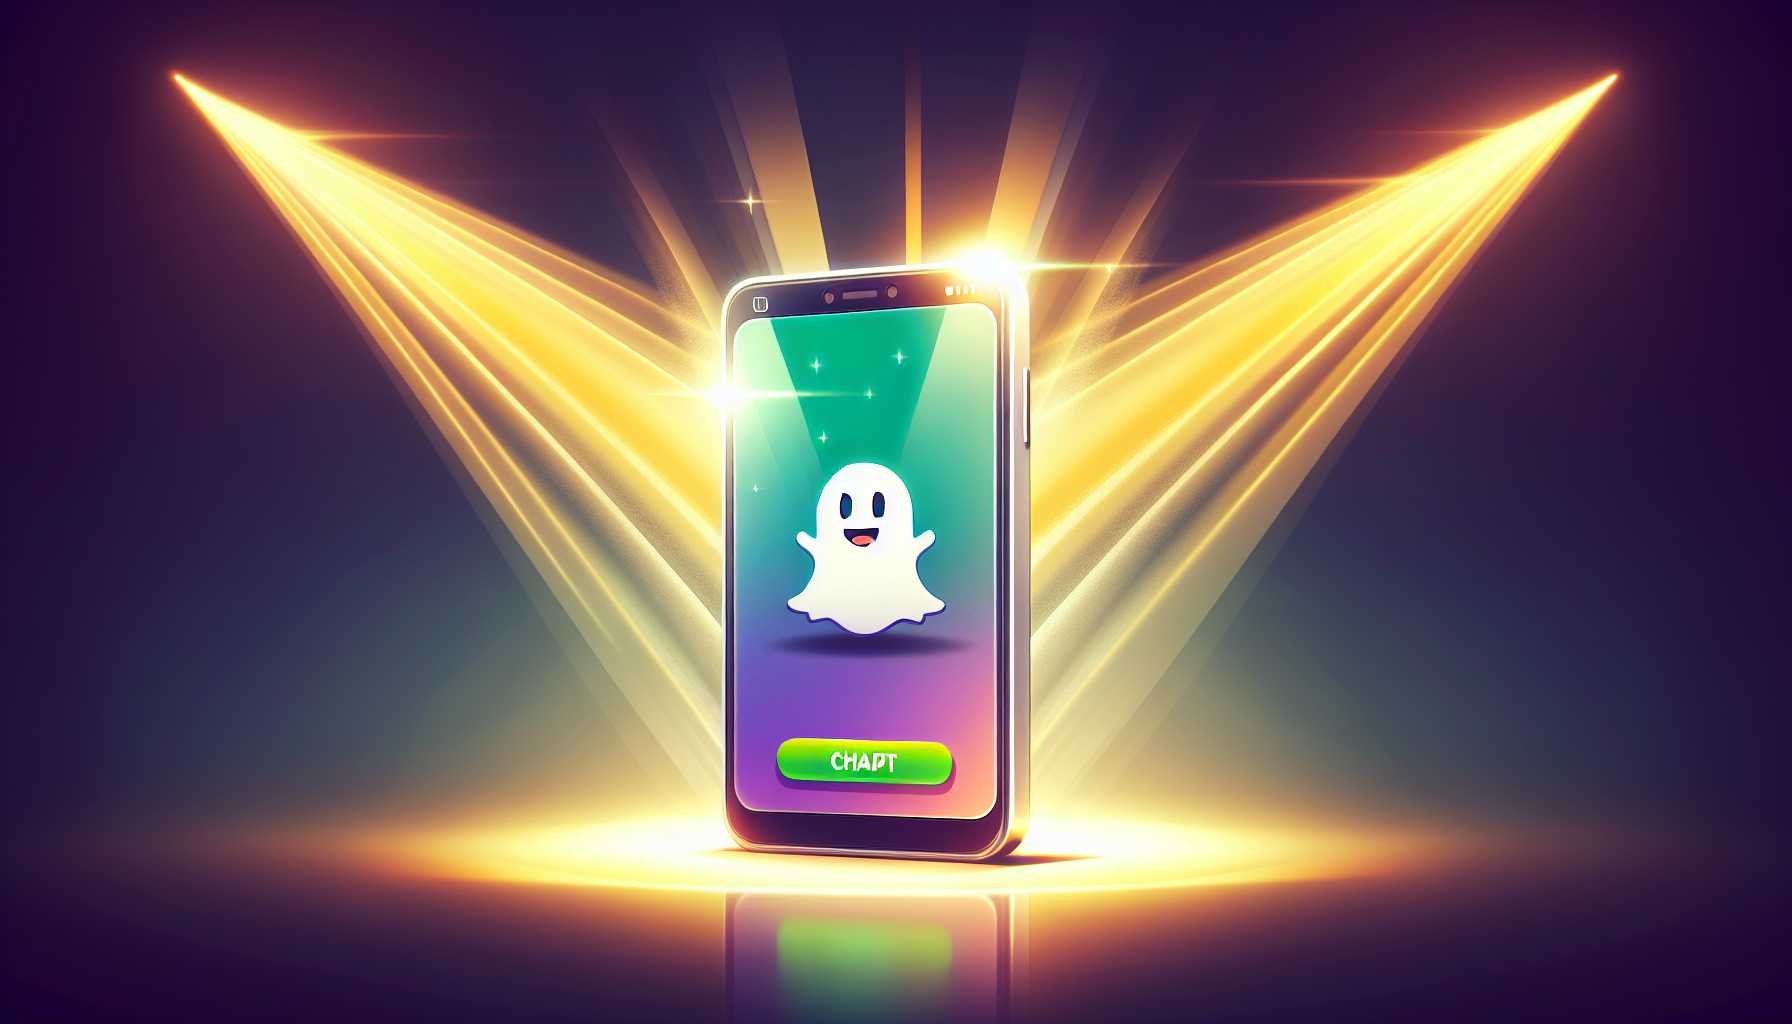 Snapchat app on a smartphone with bright spotlight beams